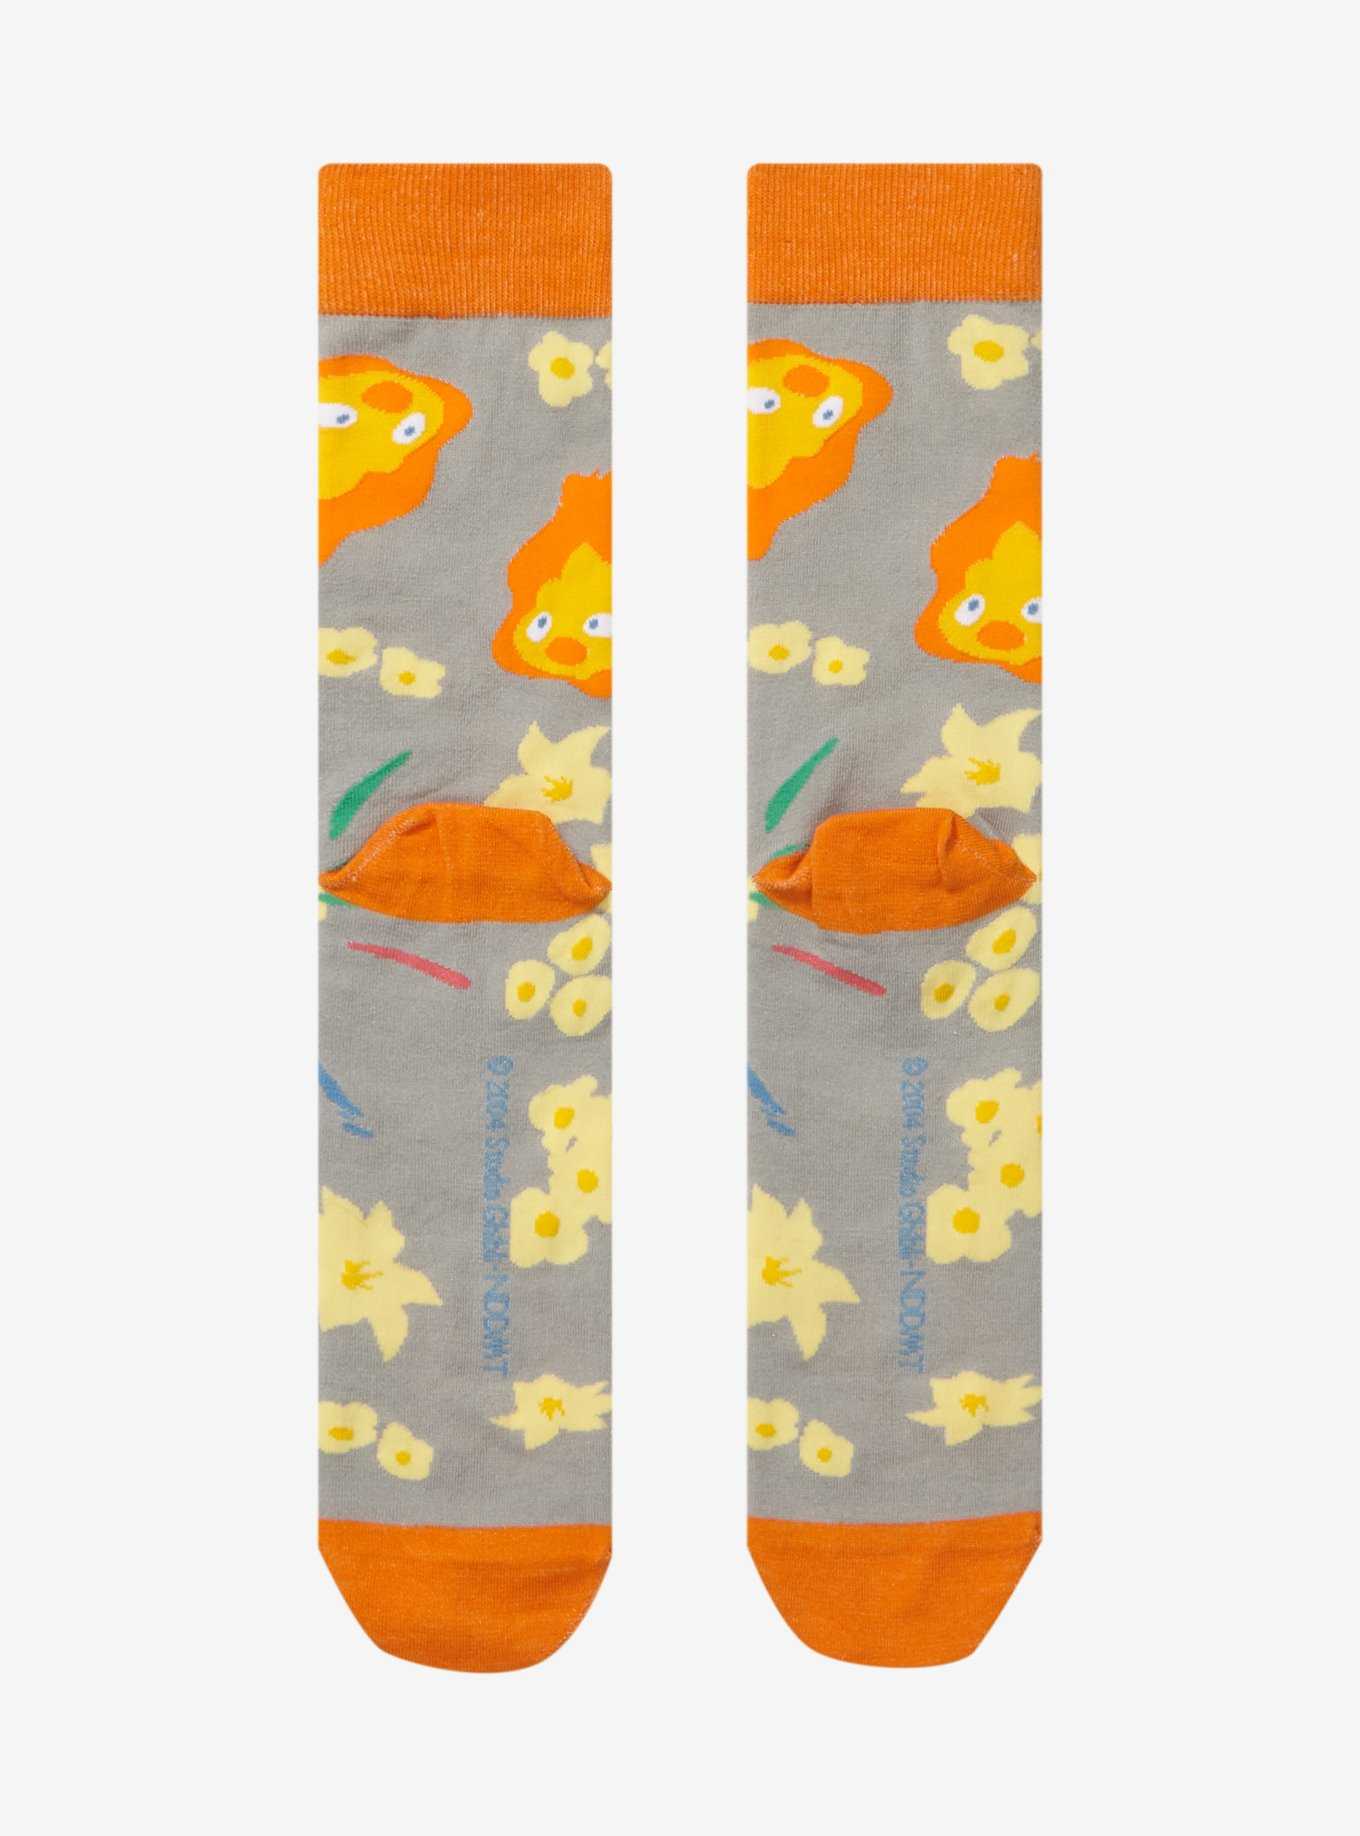 Studio Ghibli Howl's Moving Castle Calcifer & Flowers Allover Print Crew Socks - BoxLunch Exclusive, , hi-res